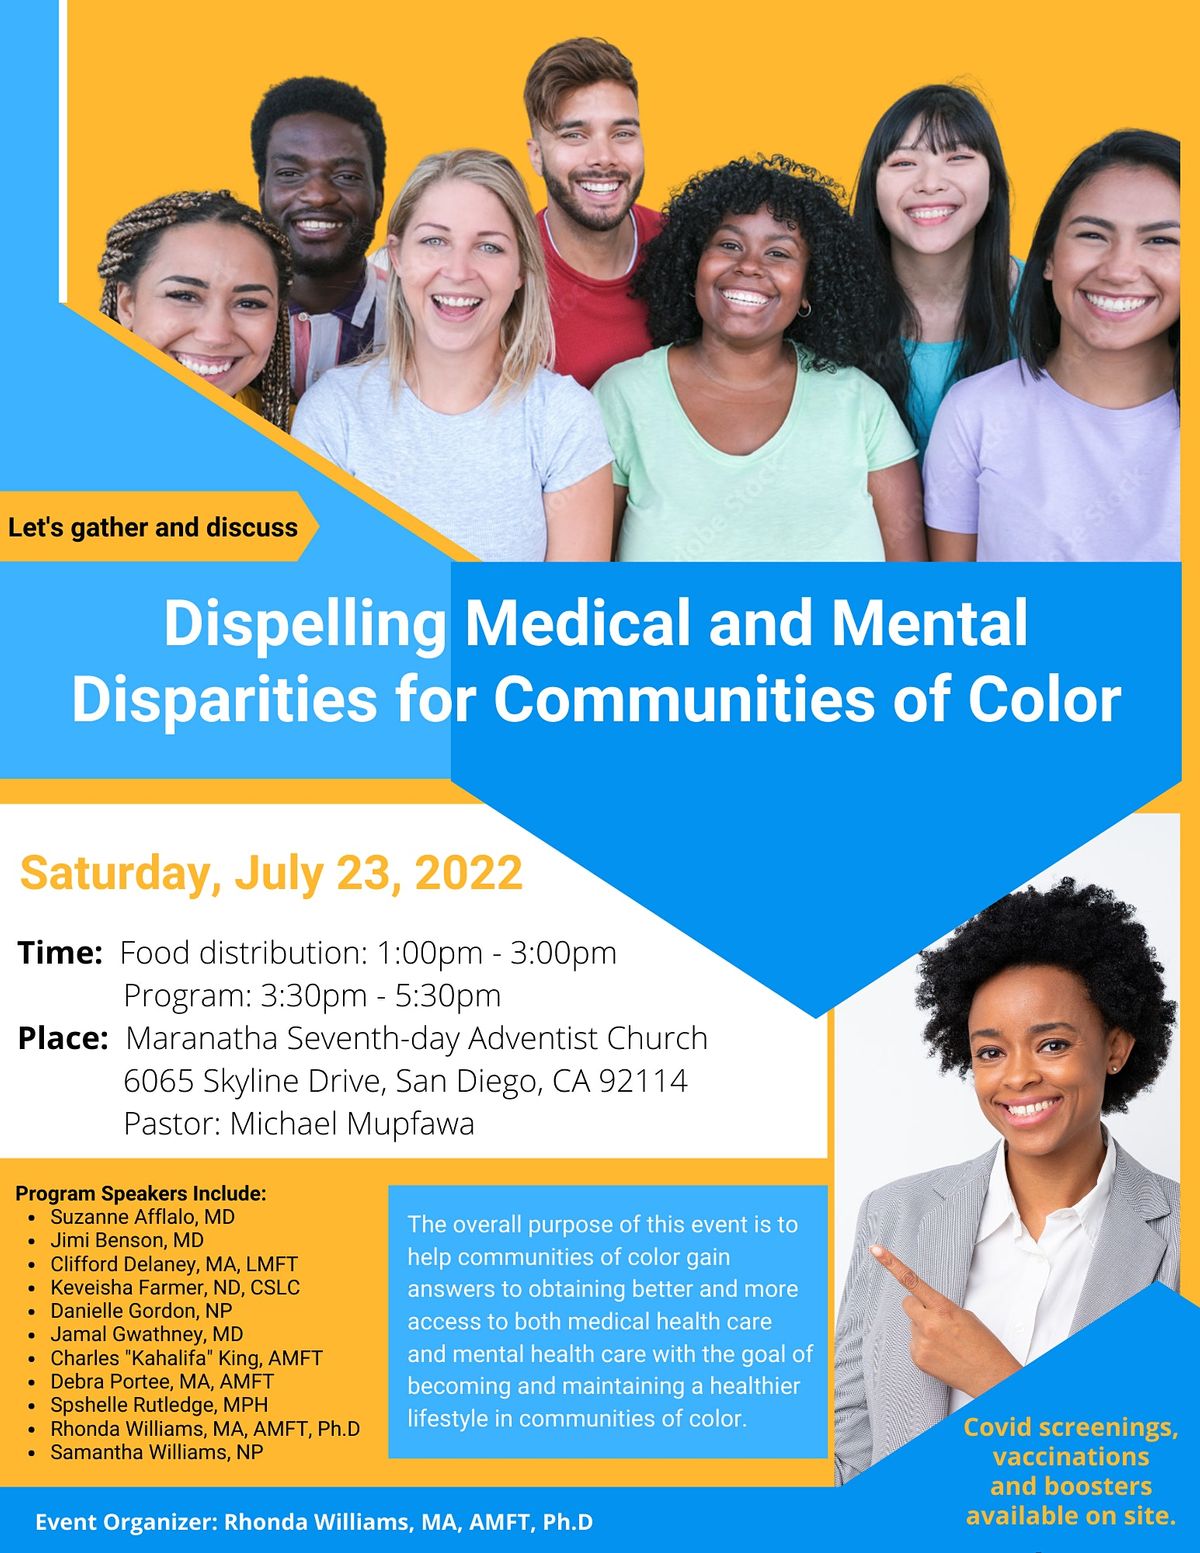 Dispelling Medical and Mental Health Disparities for Communities of Color